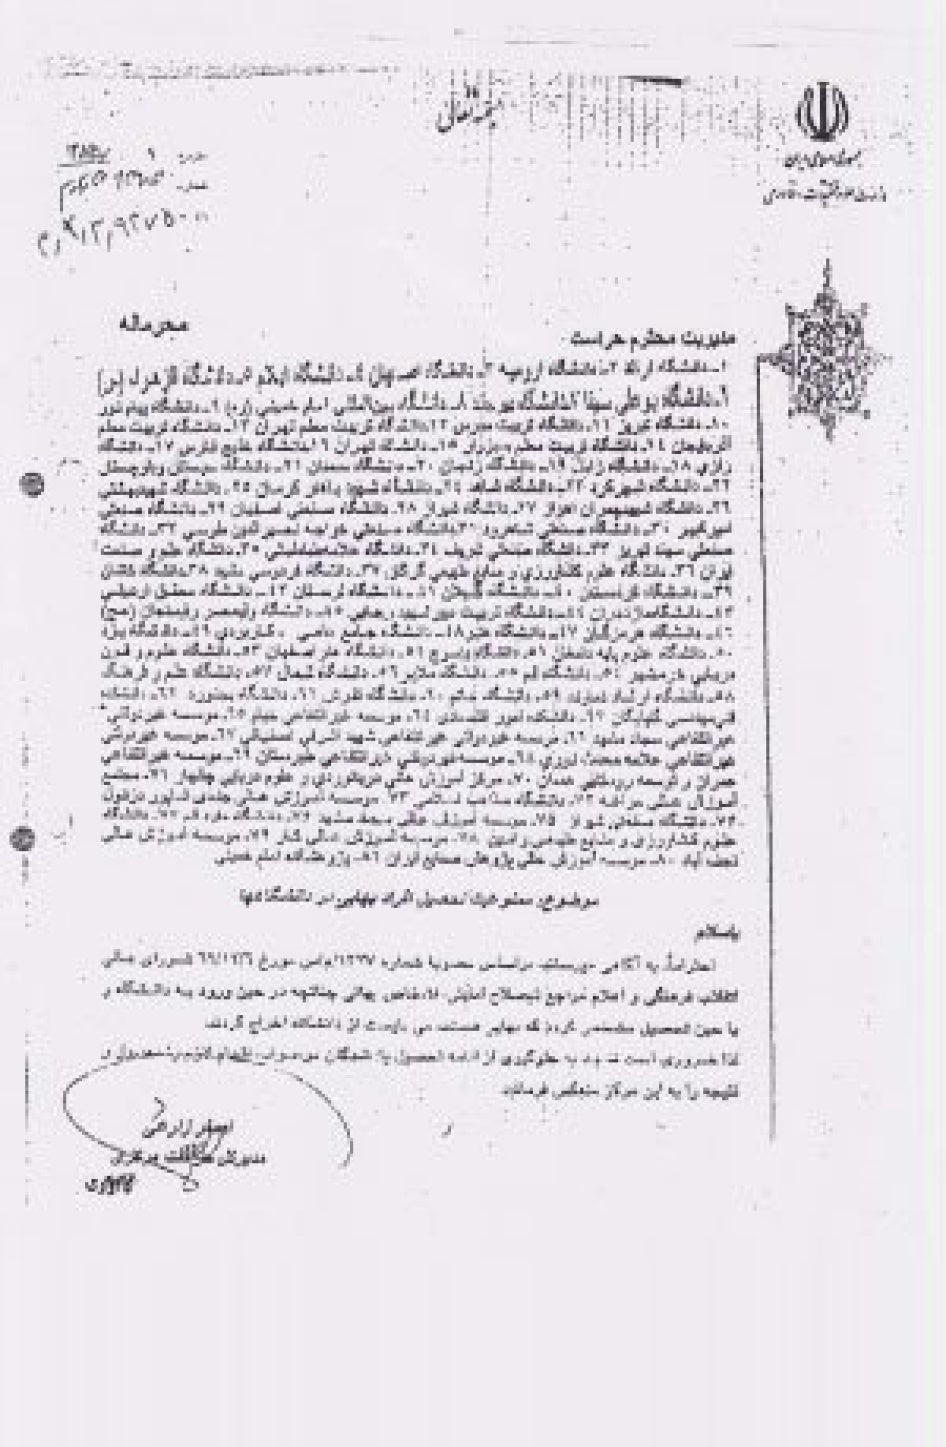 A letter from a government ministry to 81 Iranian universities